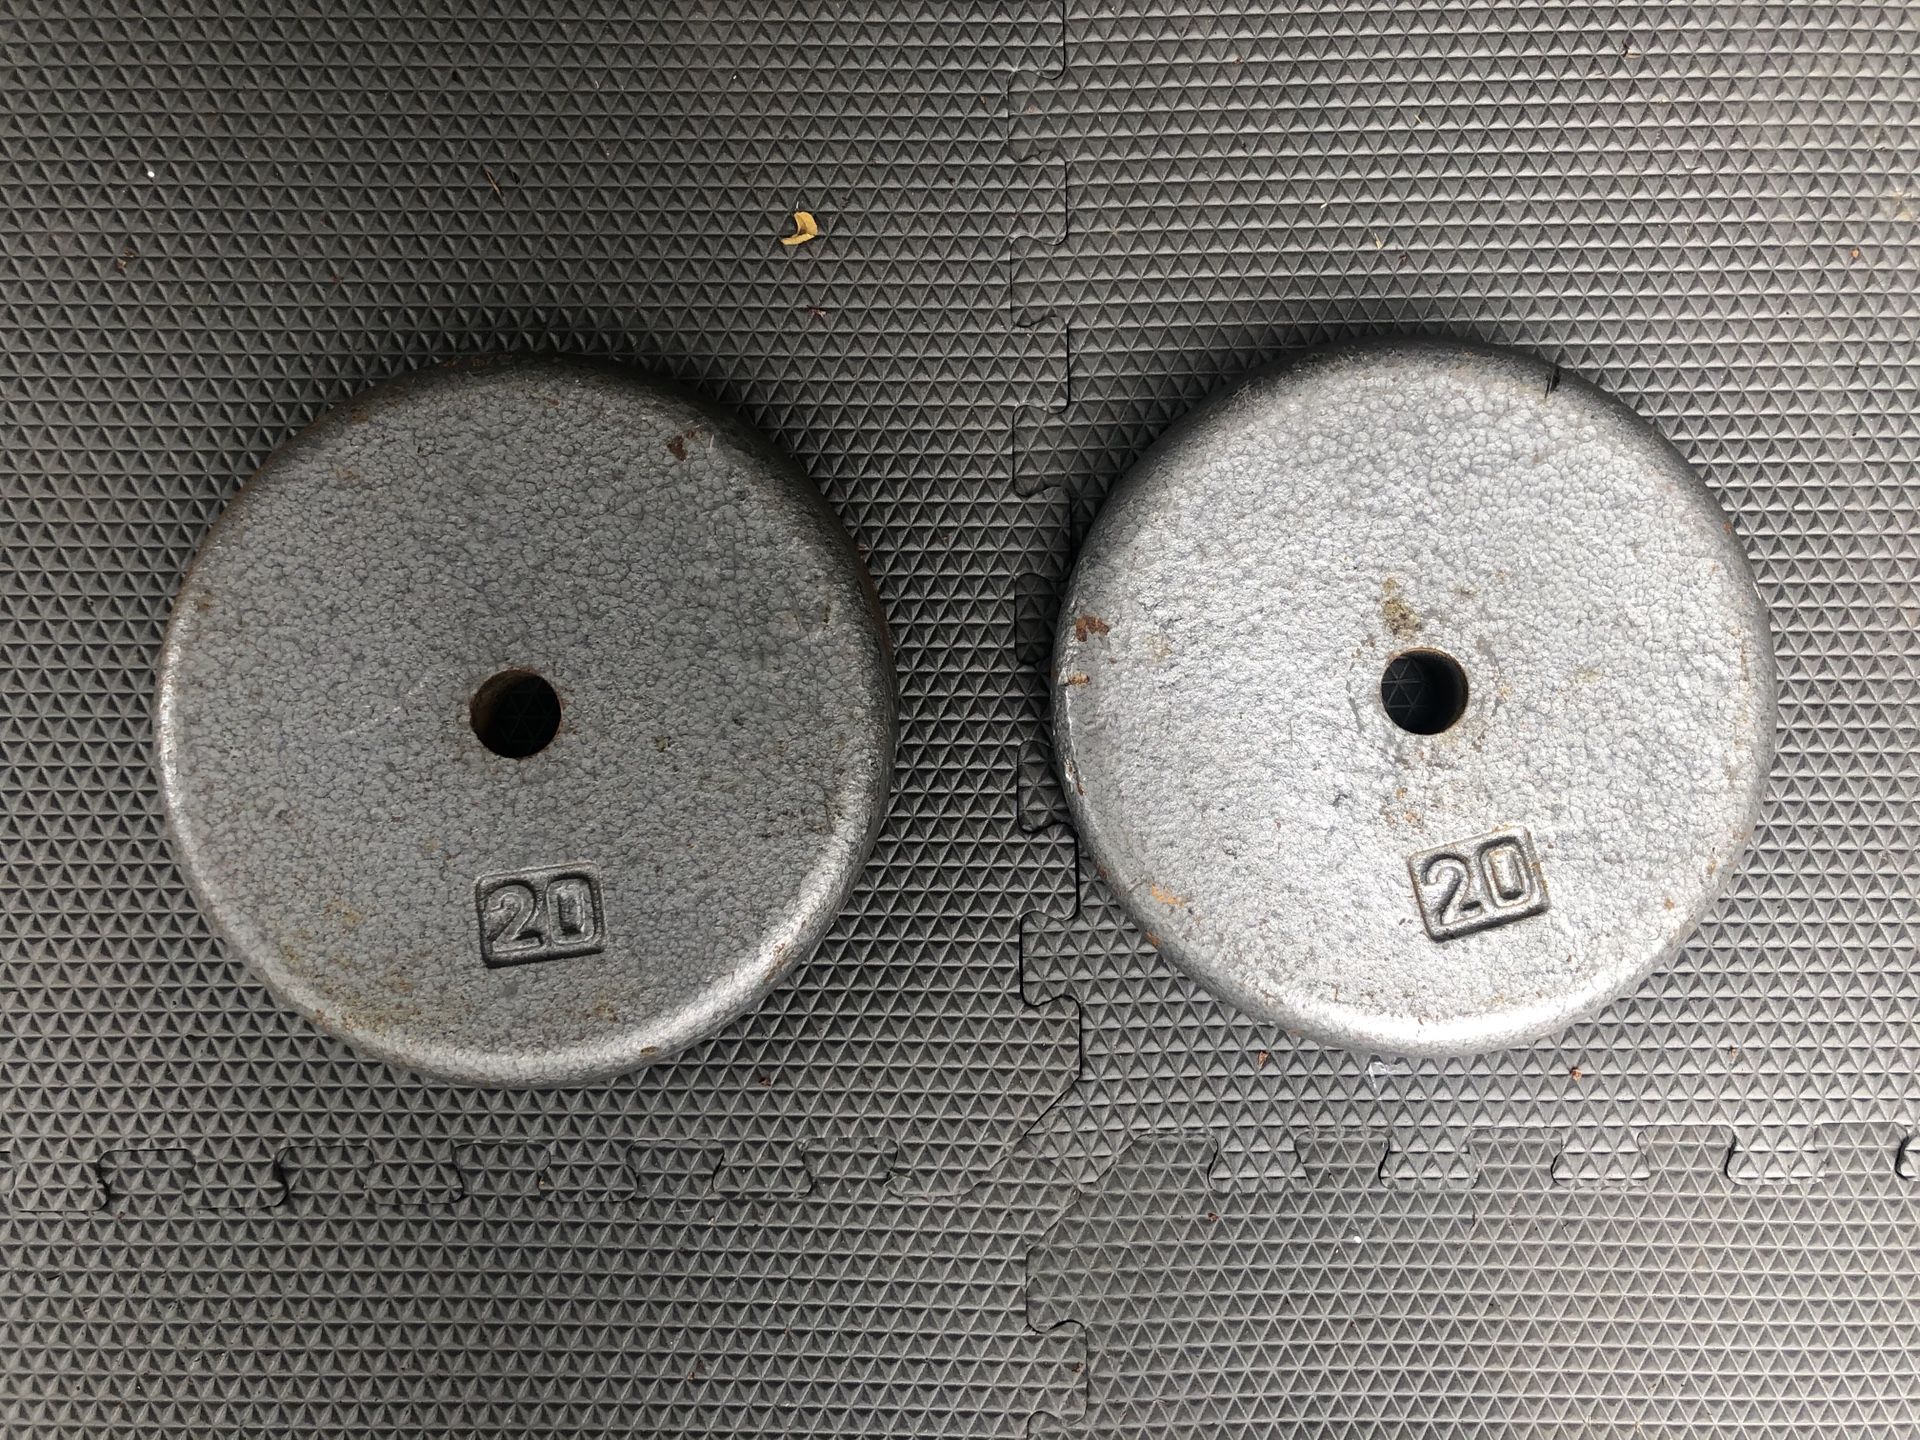 Pair of 20 lbs weights